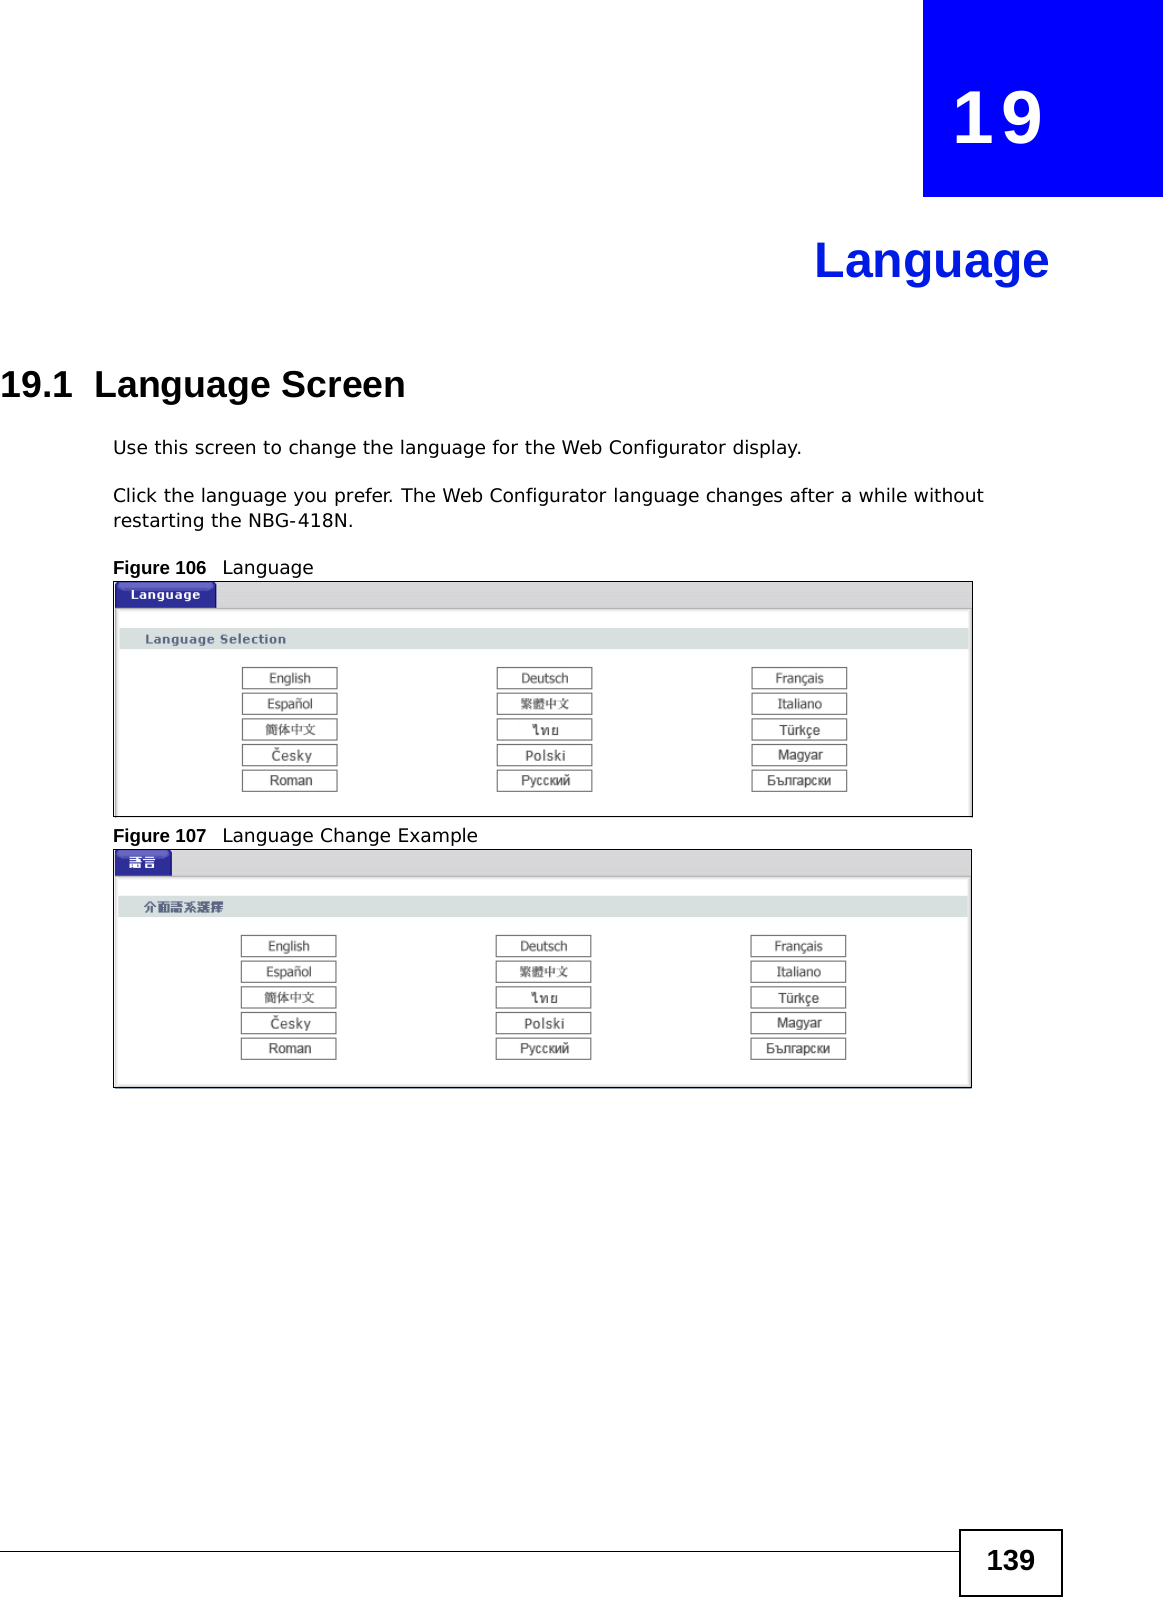 139CHAPTER   19Language19.1  Language ScreenUse this screen to change the language for the Web Configurator display.Click the language you prefer. The Web Configurator language changes after a while without restarting the NBG-418N.Figure 106   LanguageFigure 107   Language Change Example